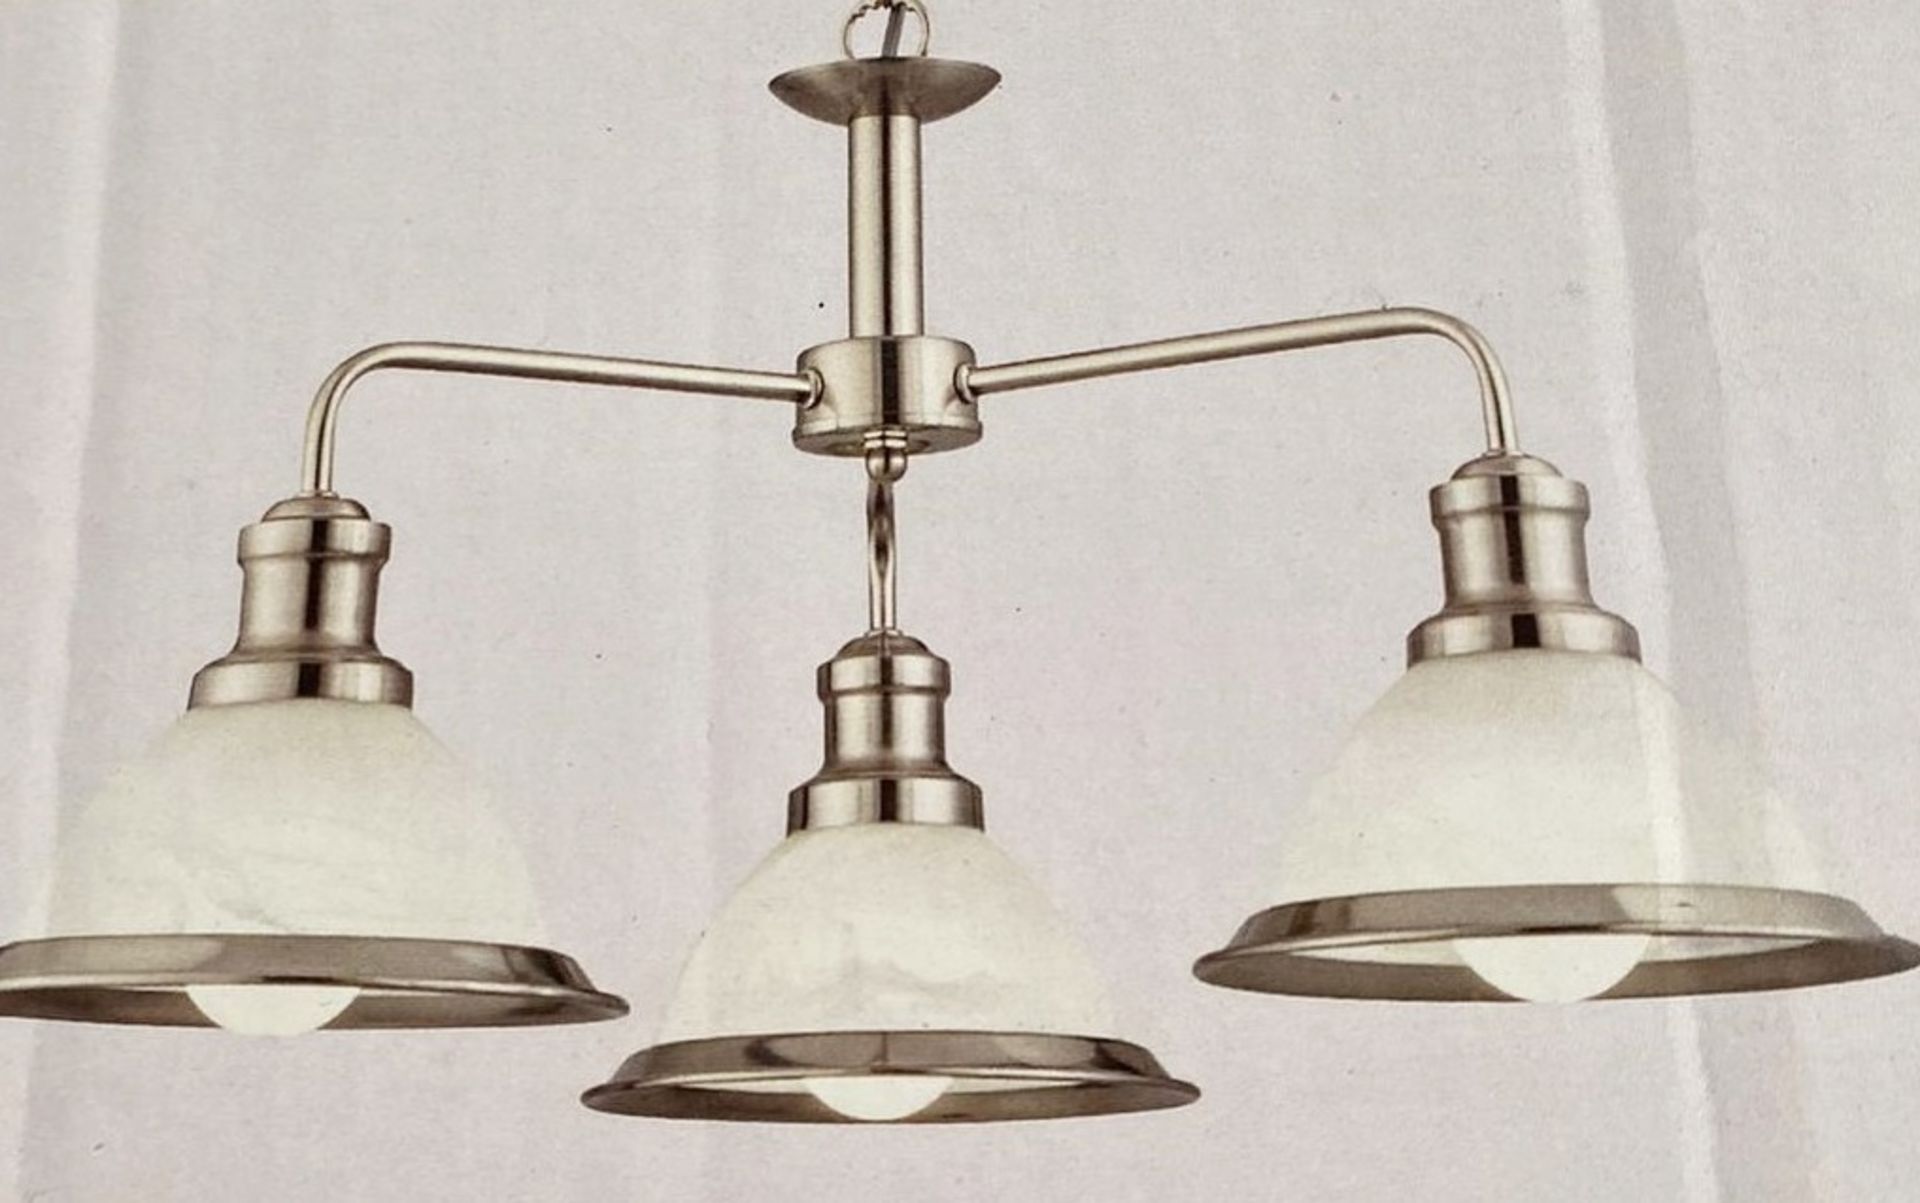 1 x Searchlight Industrial Ceiling Light in satin silver - Ref: 1593-3SS - New and Boxed - RRP: £10 - Image 2 of 4